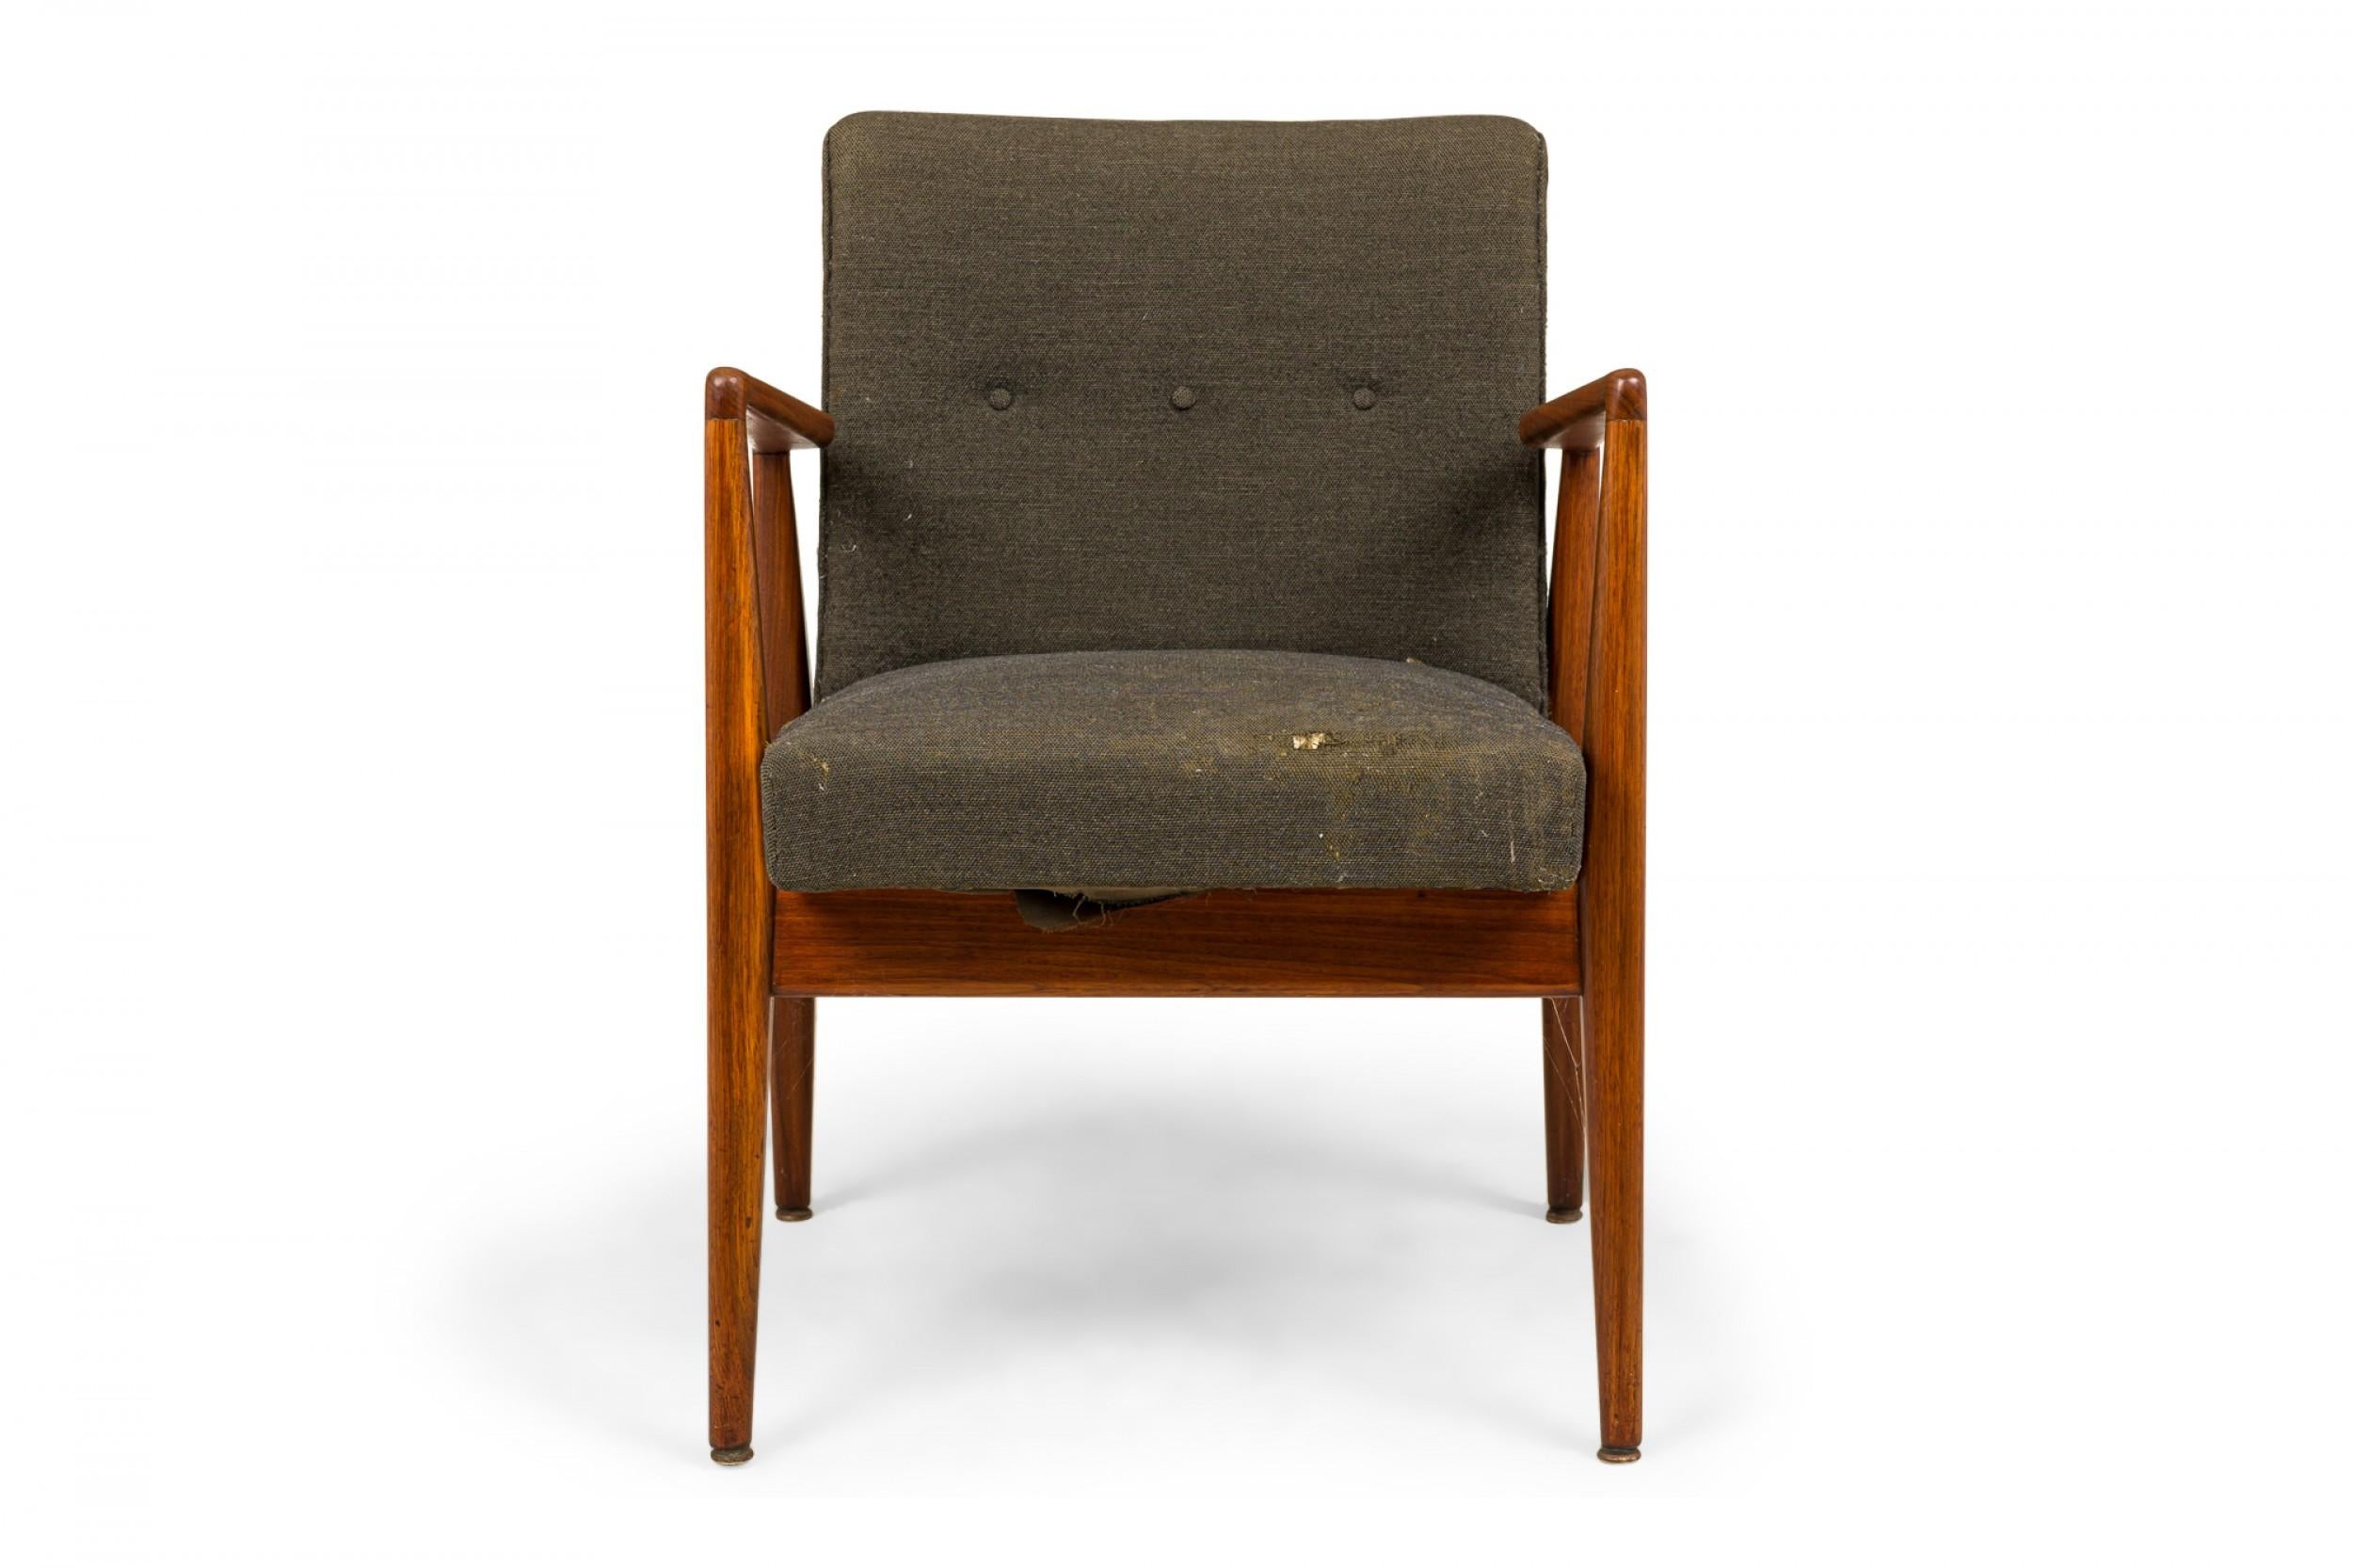 Danish Mid-Century 'Playboy' armchair with and angular teak wood frame and gray woven fabric upholstered seat and back with button tufting. (JENS RISOM)
